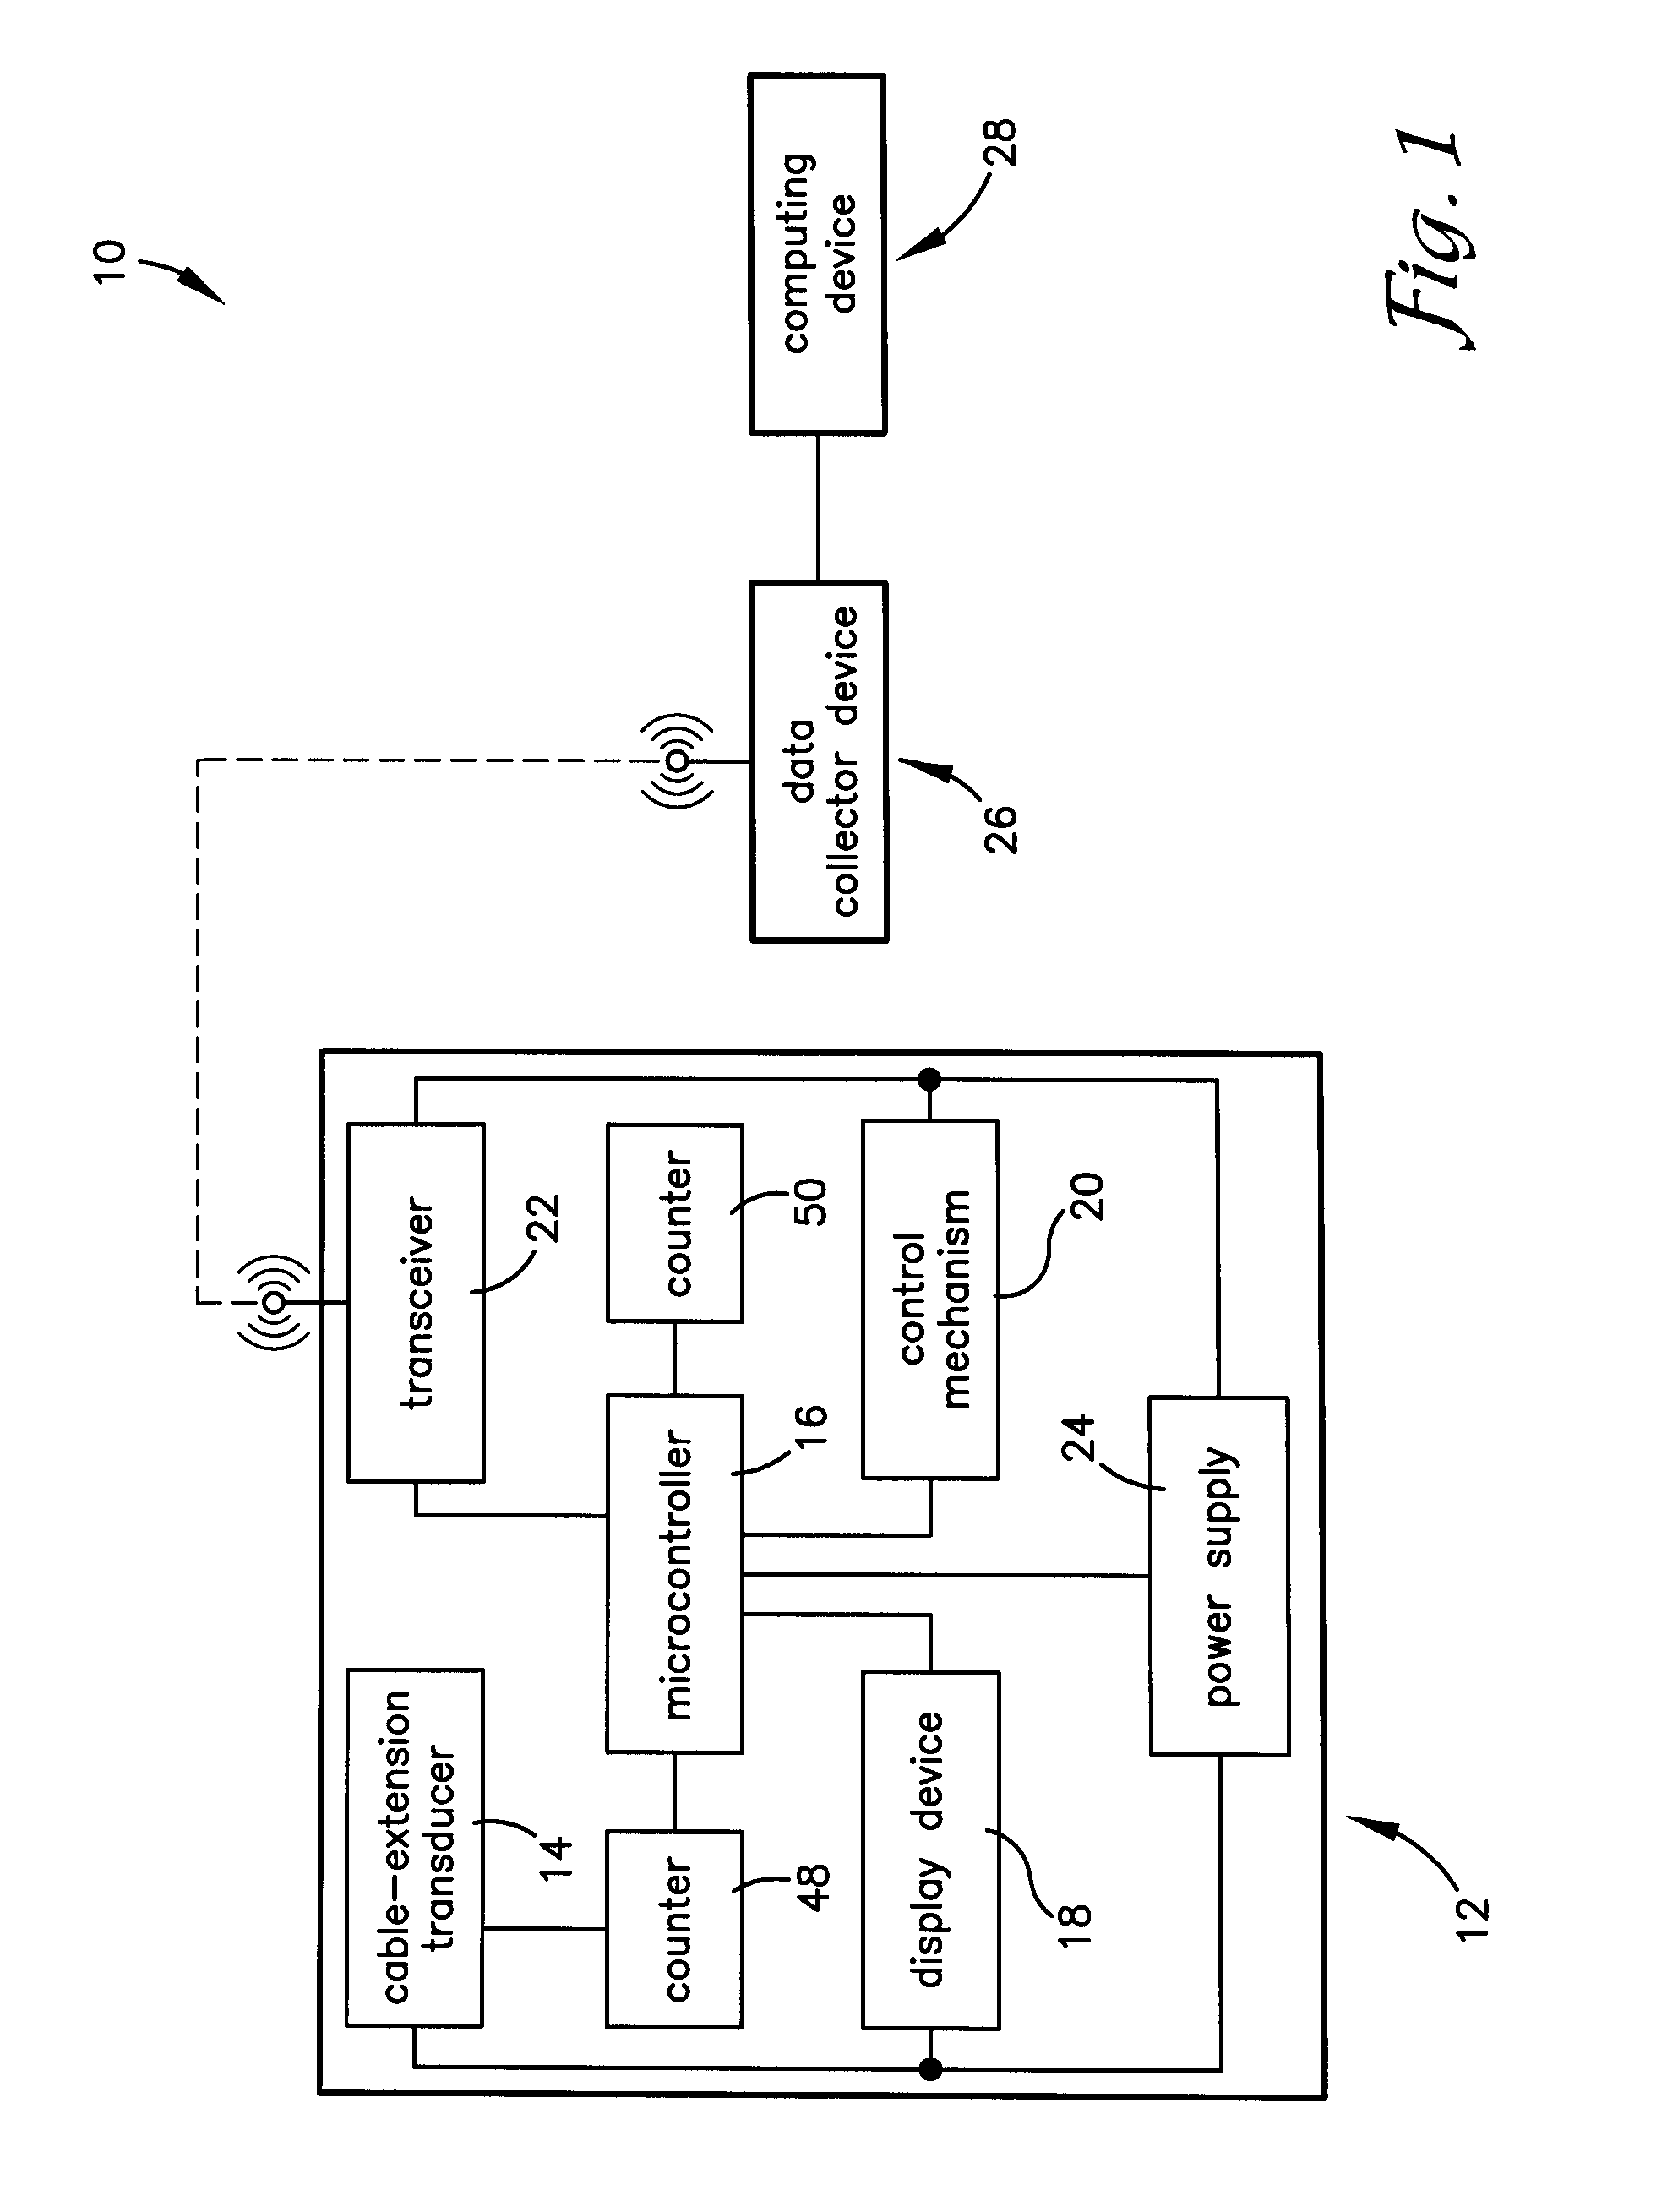 System and method for measuring and recording distance